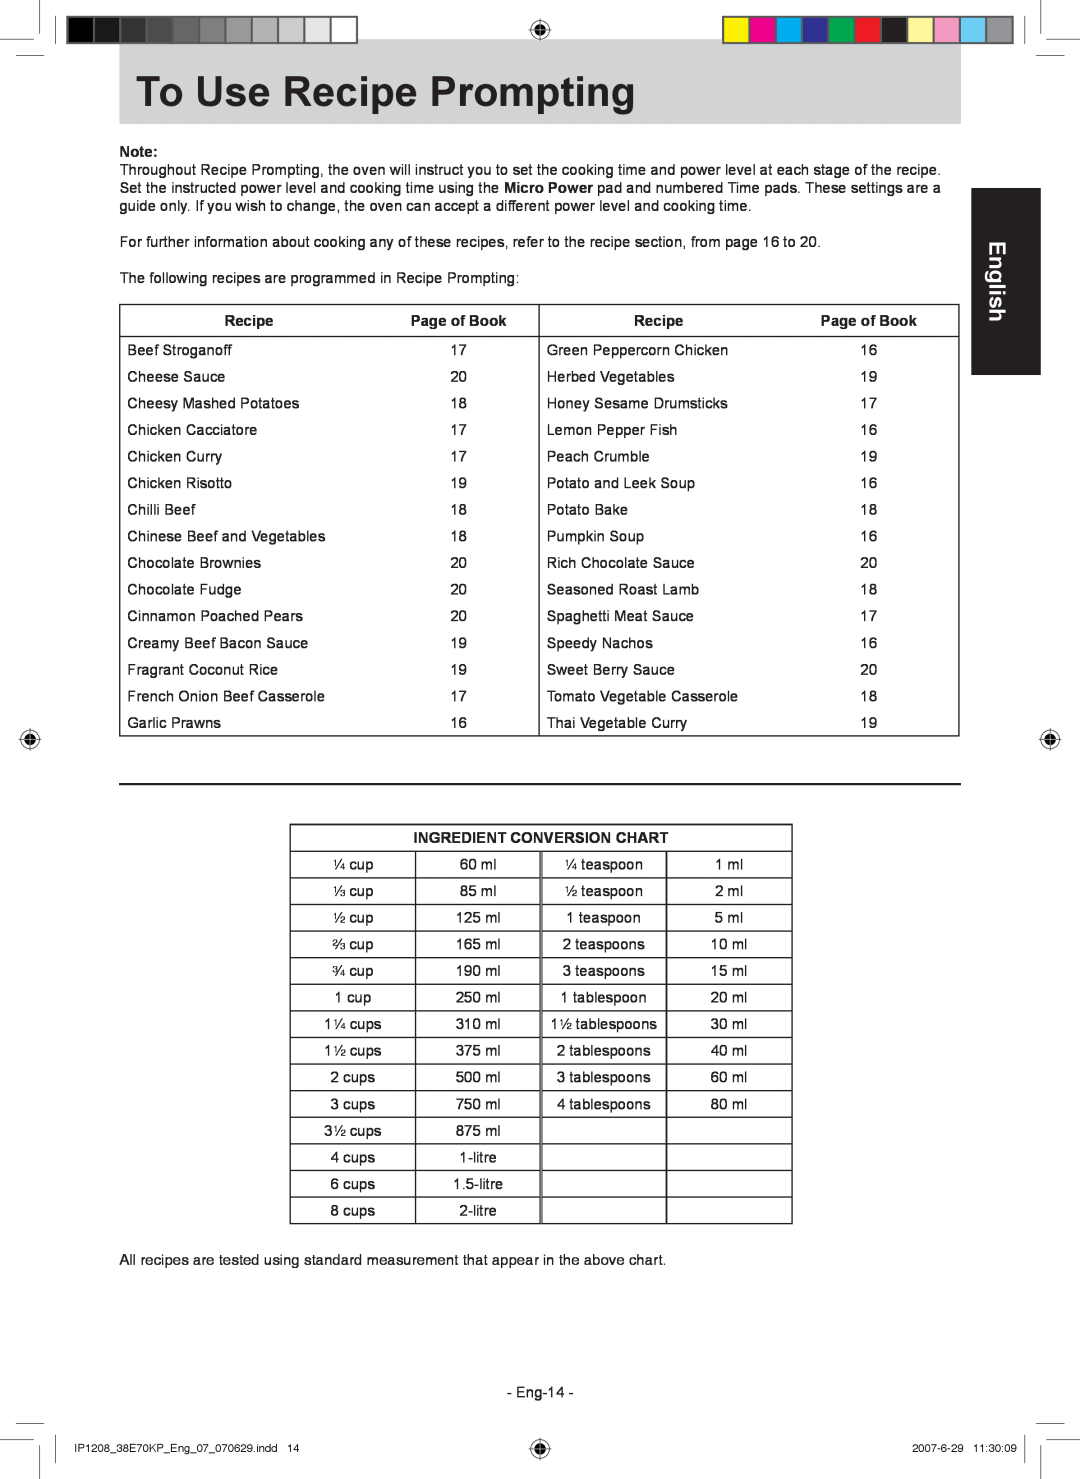 Panasonic NN-ST757W manual To Use Recipe Prompting, English, Page of Book, Ingredient Conversion Chart 